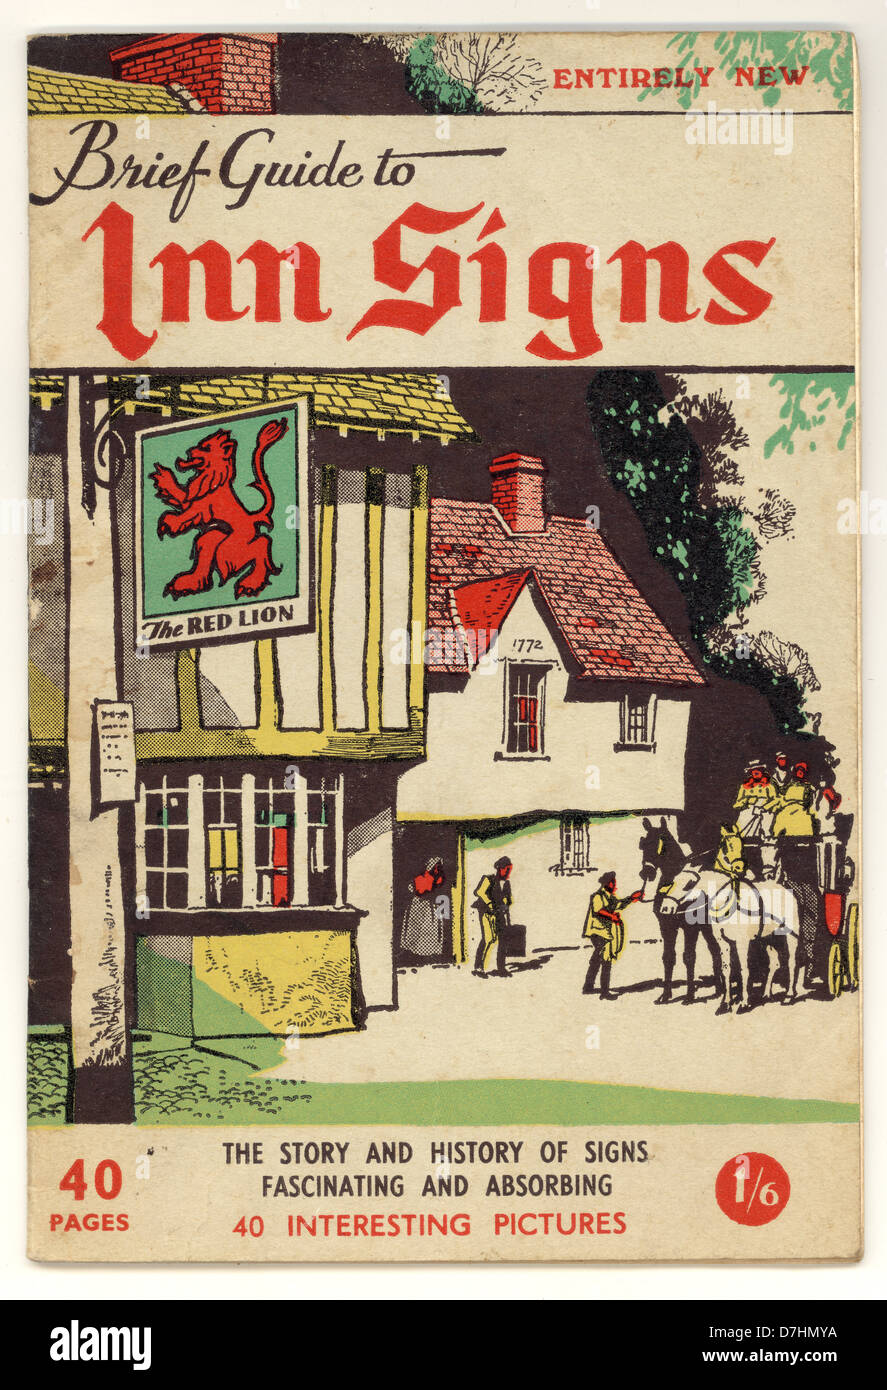 Original 1960's booklet - Brief Guide to Inn Signs - circa 1965 - published by Raleigh Press, Exmouth, Devon, UK Stock Photo